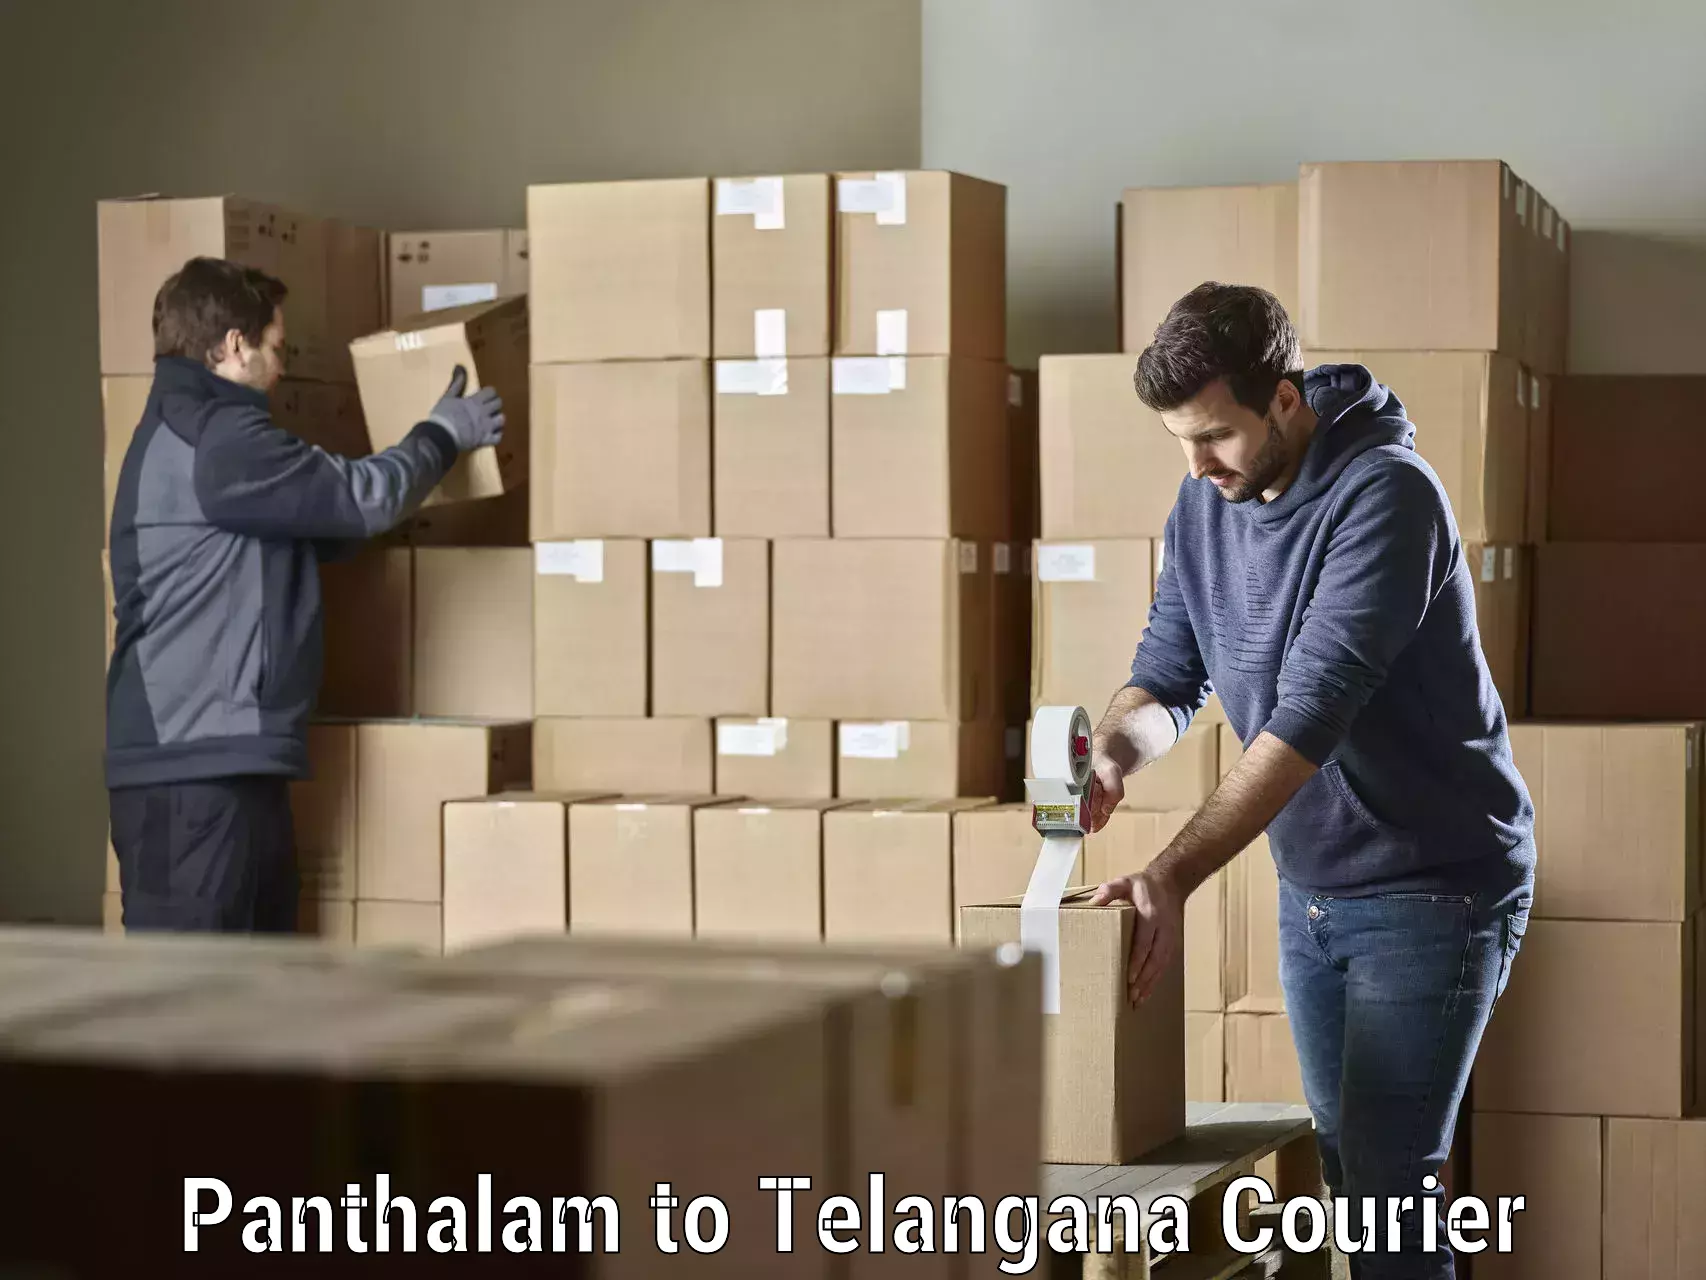 Courier service partnerships in Panthalam to Hyderabad